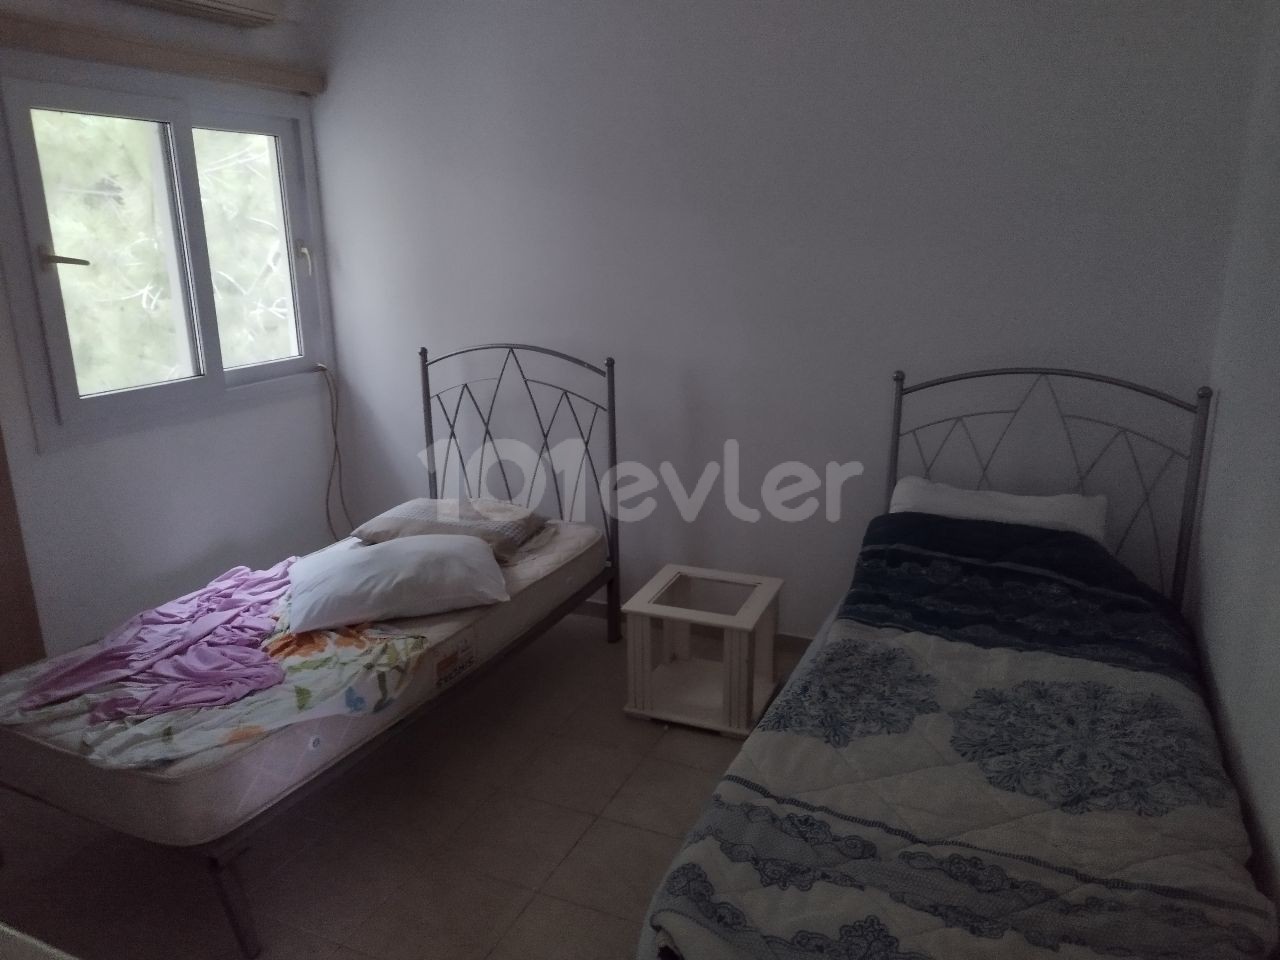 Kyrenia center furnished 2+1 apartment for rent near Lord's Palace Hotel